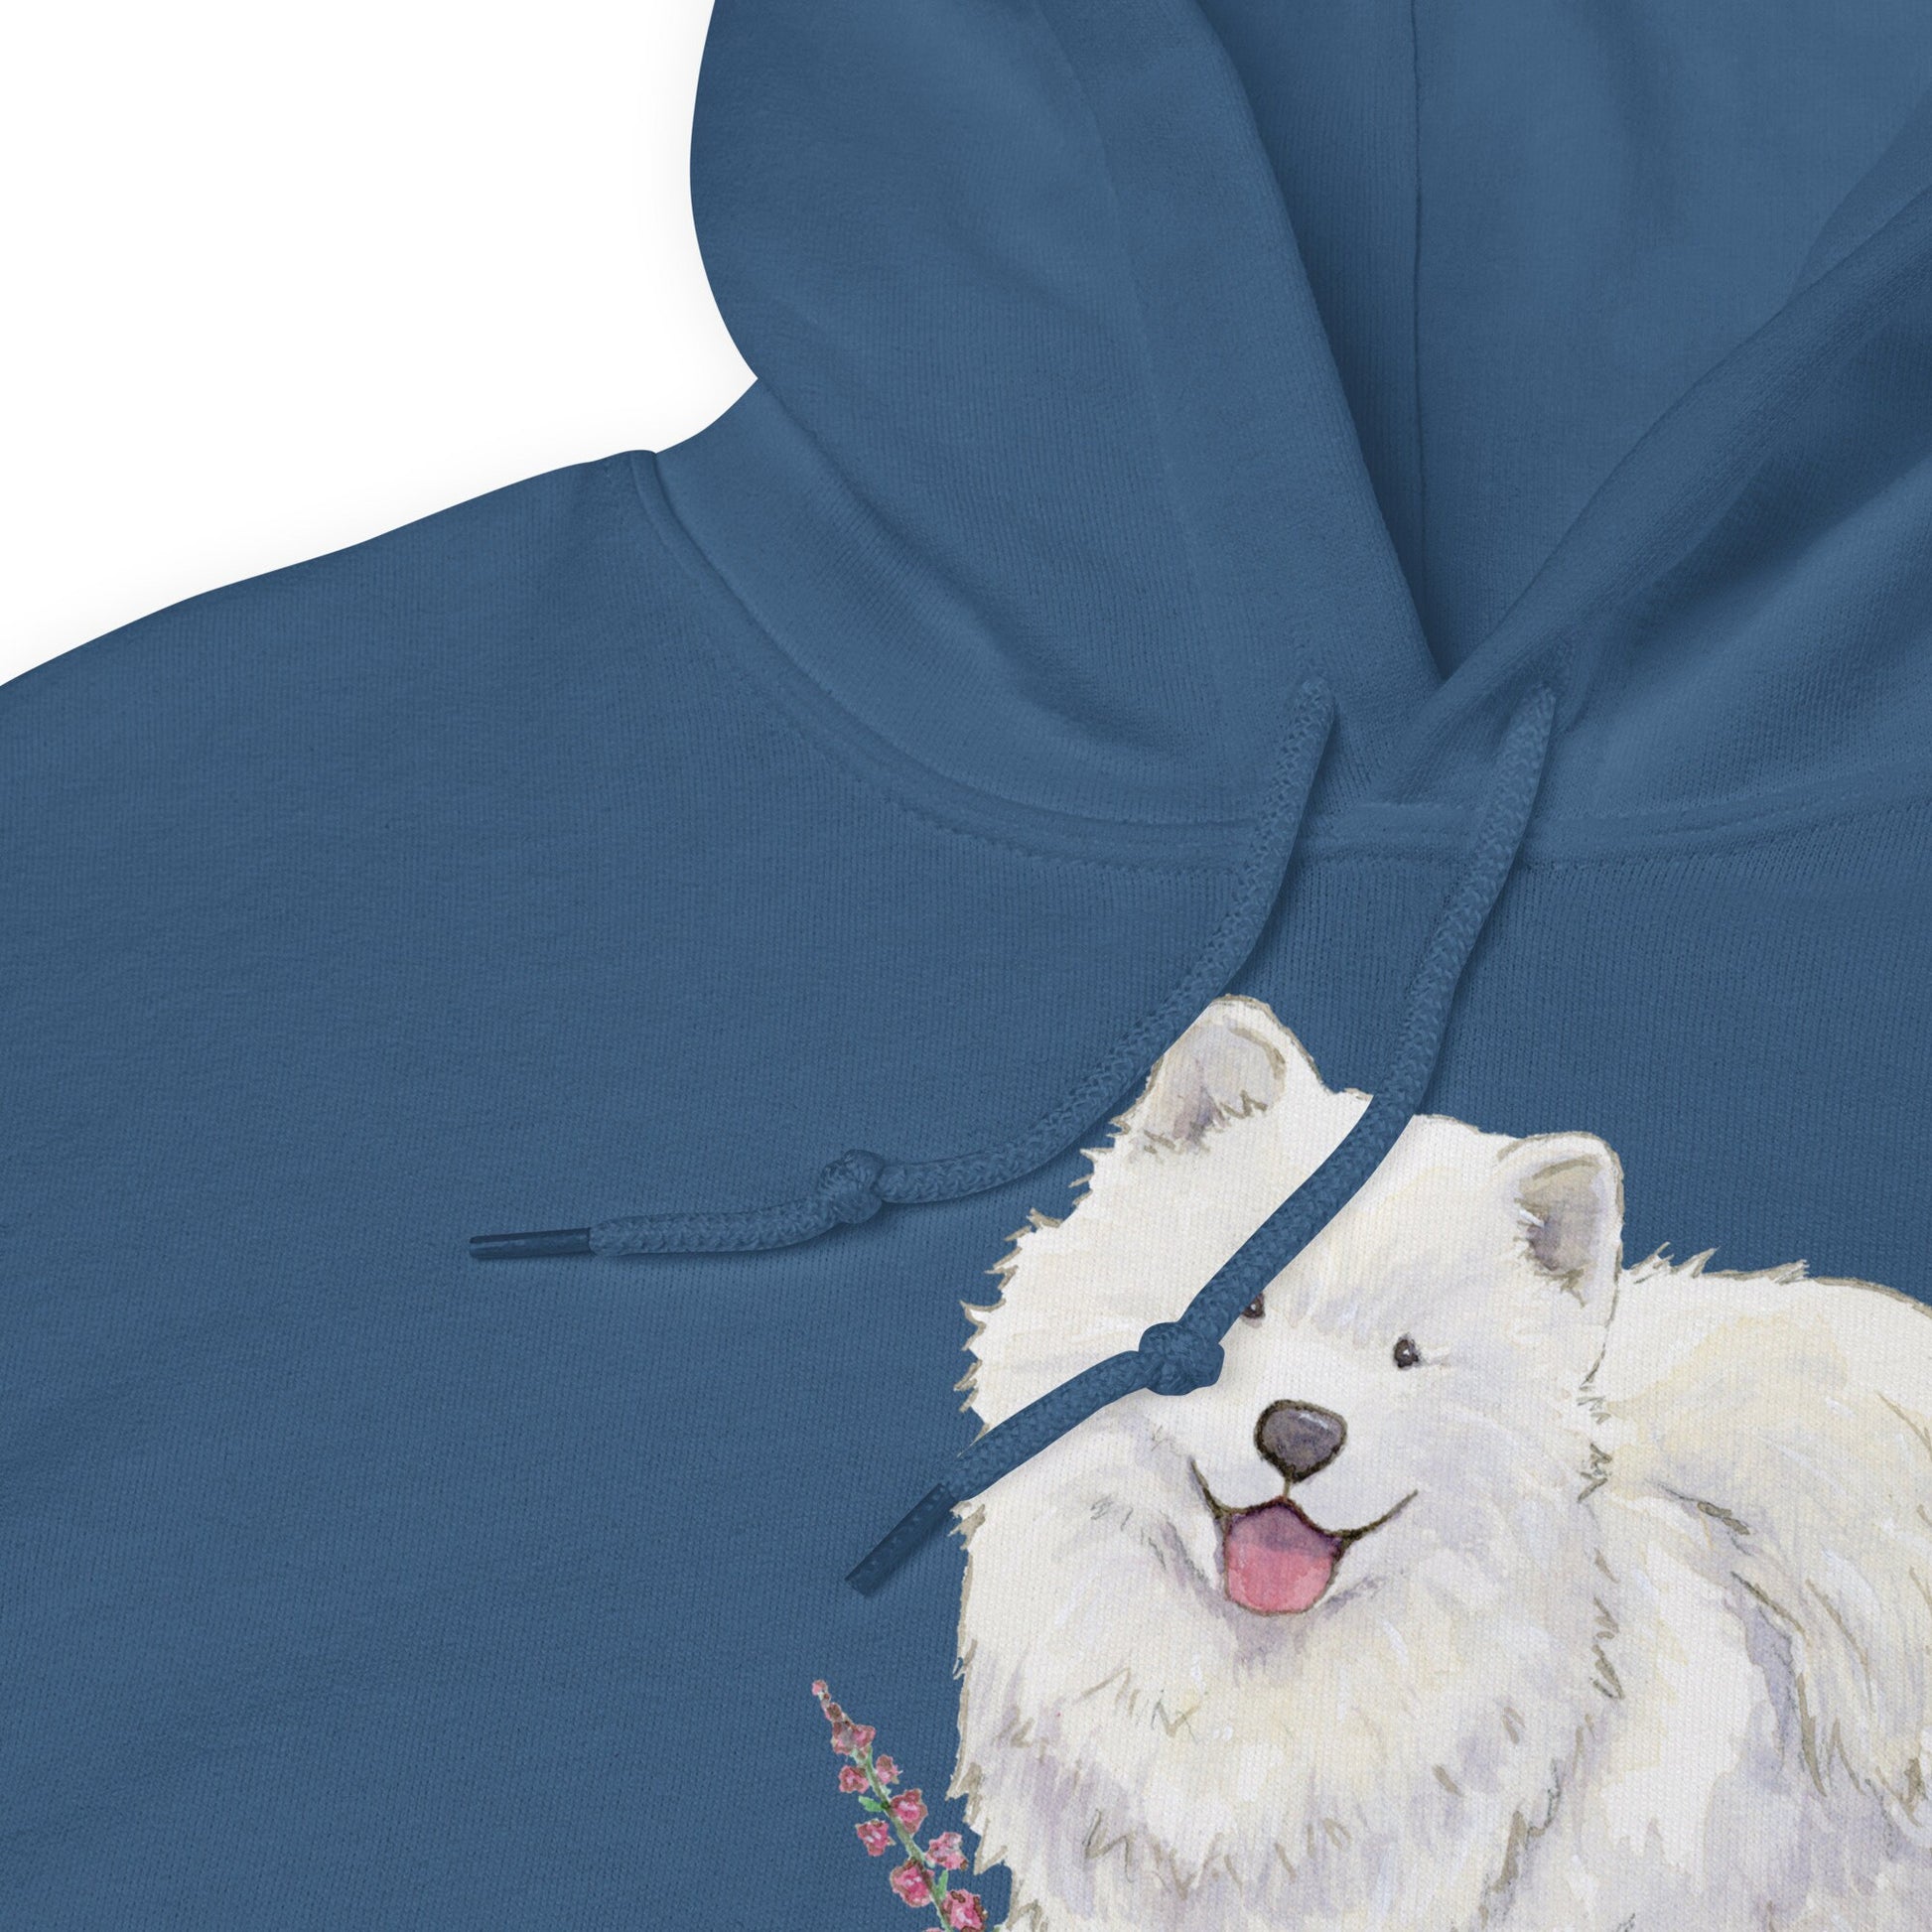 close up of dark blue hooded sweatshirt with cute artwork of samoyed dog and wildflowers